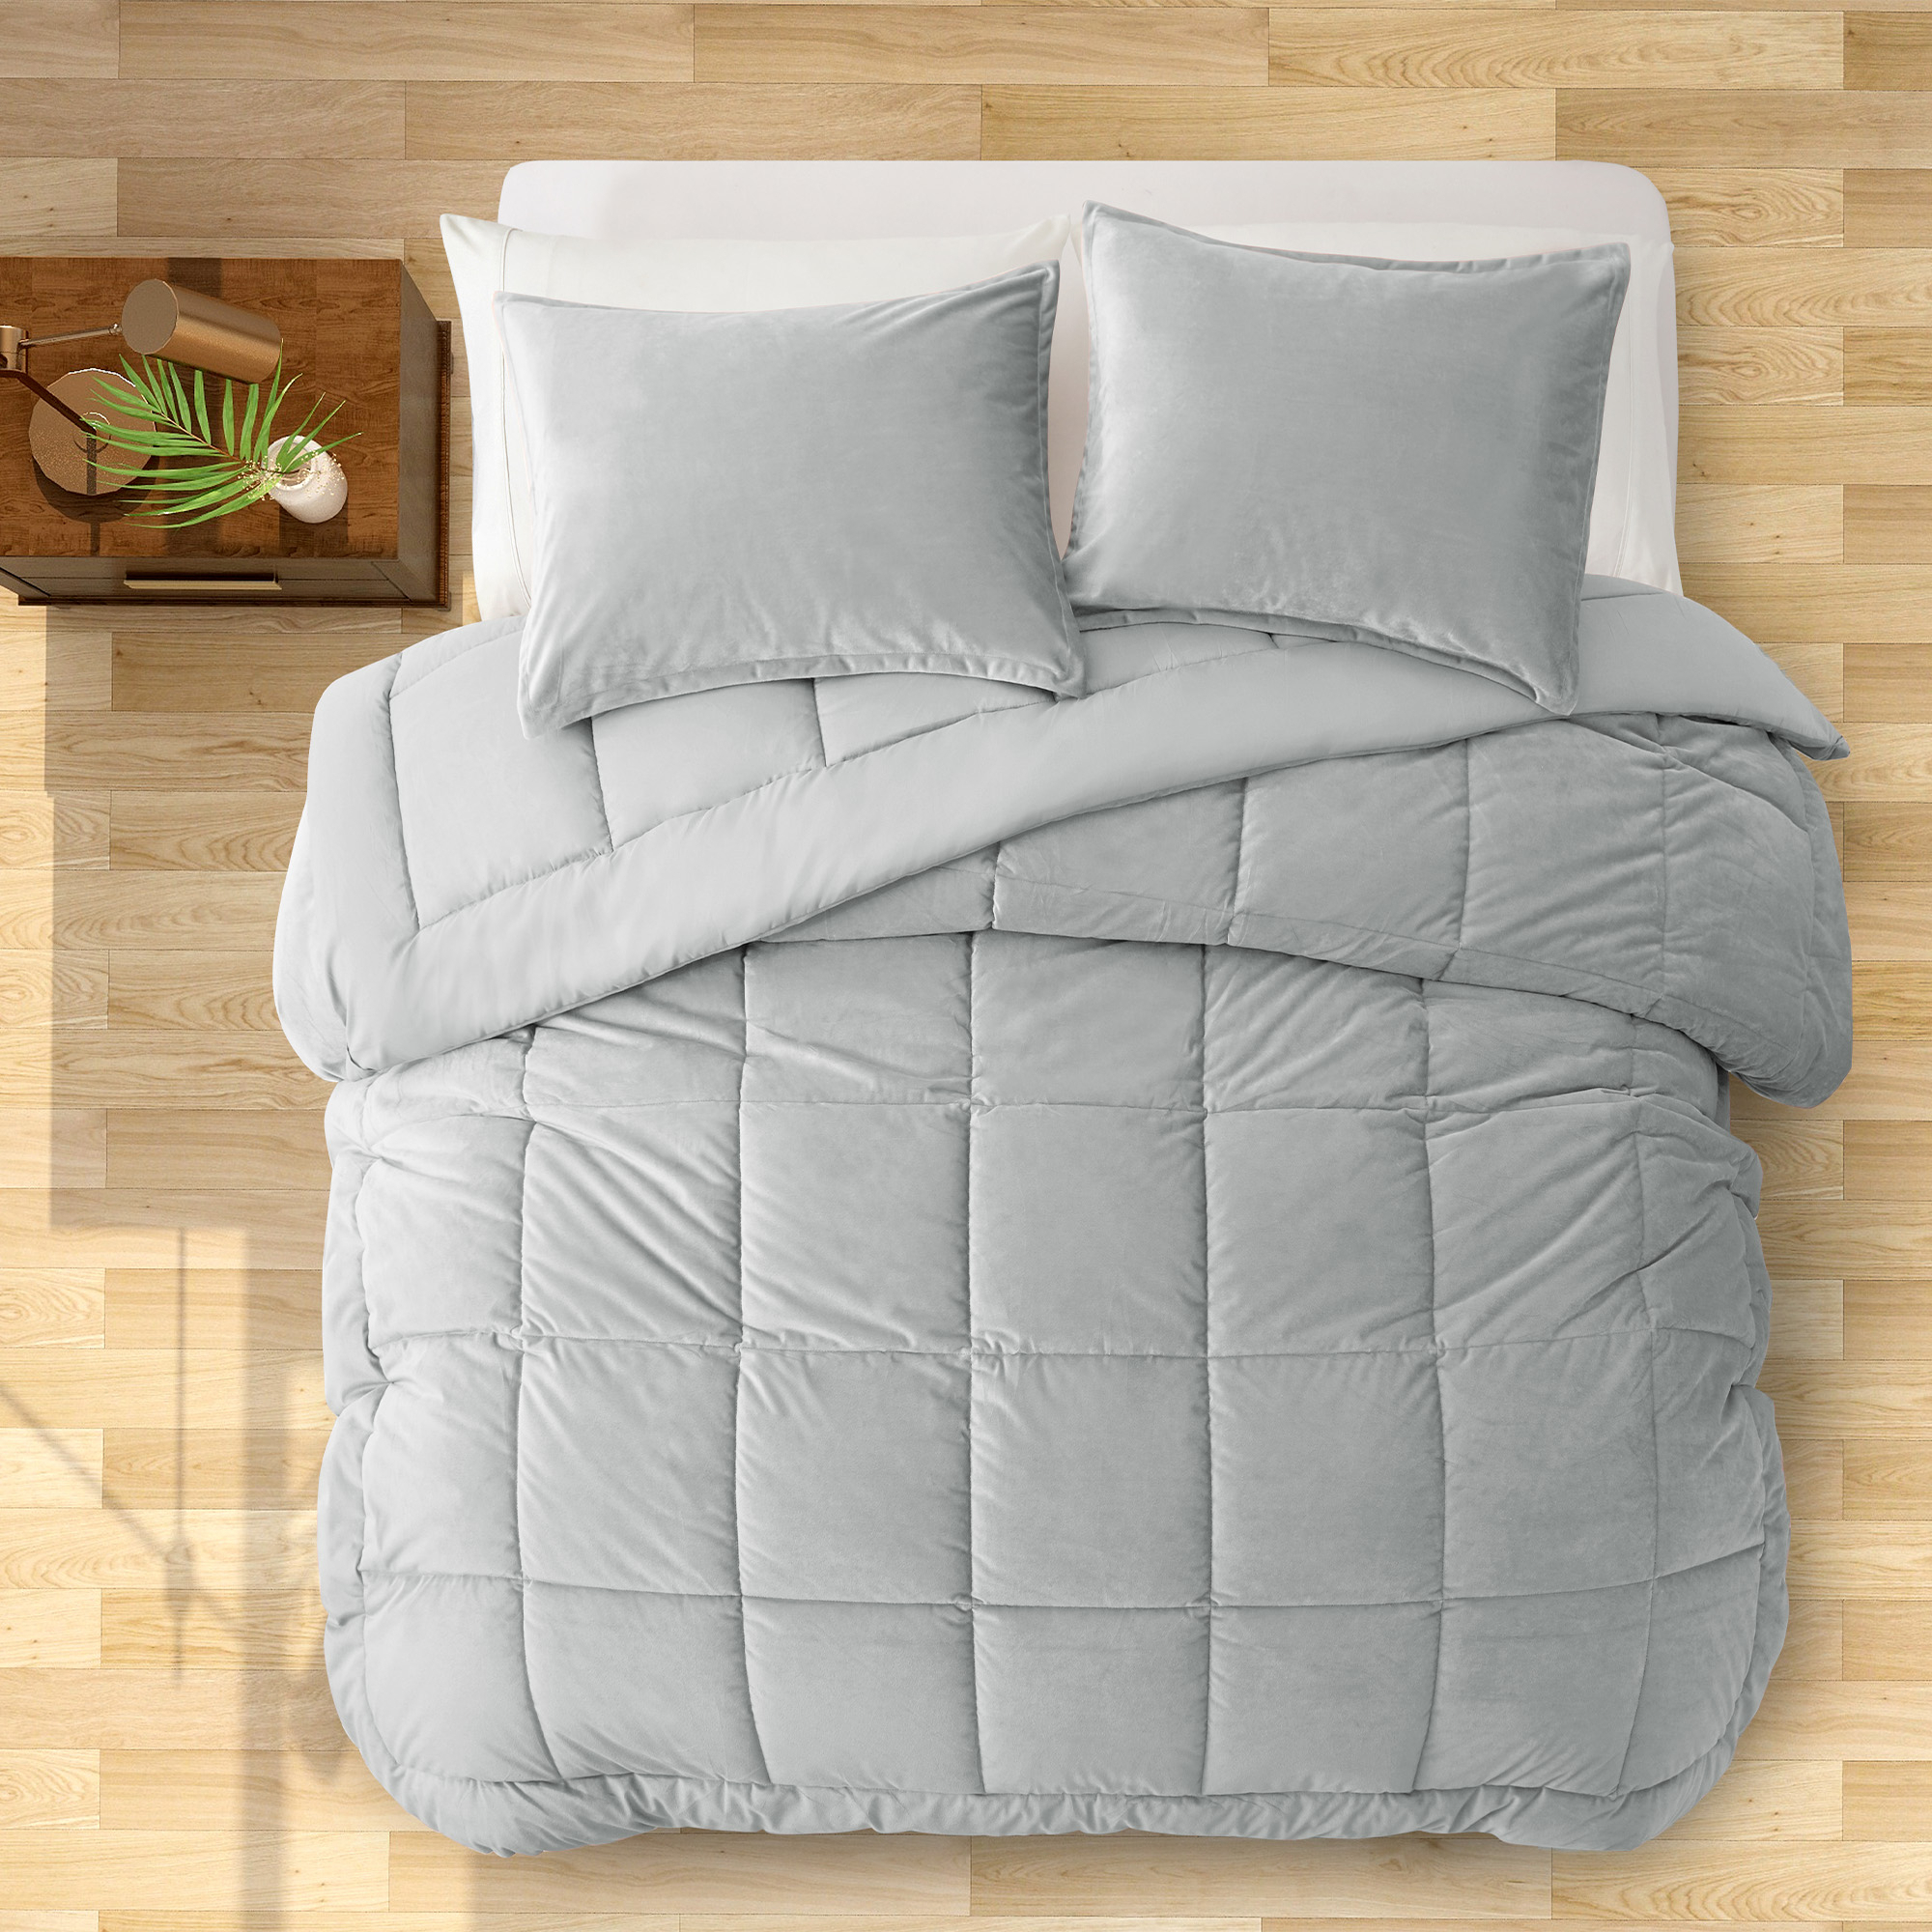 2 Or 3 Pieces Quilted Comforter All Season Down Alternative Reversible Ultra Soft Velet Duvet Insert - King Size